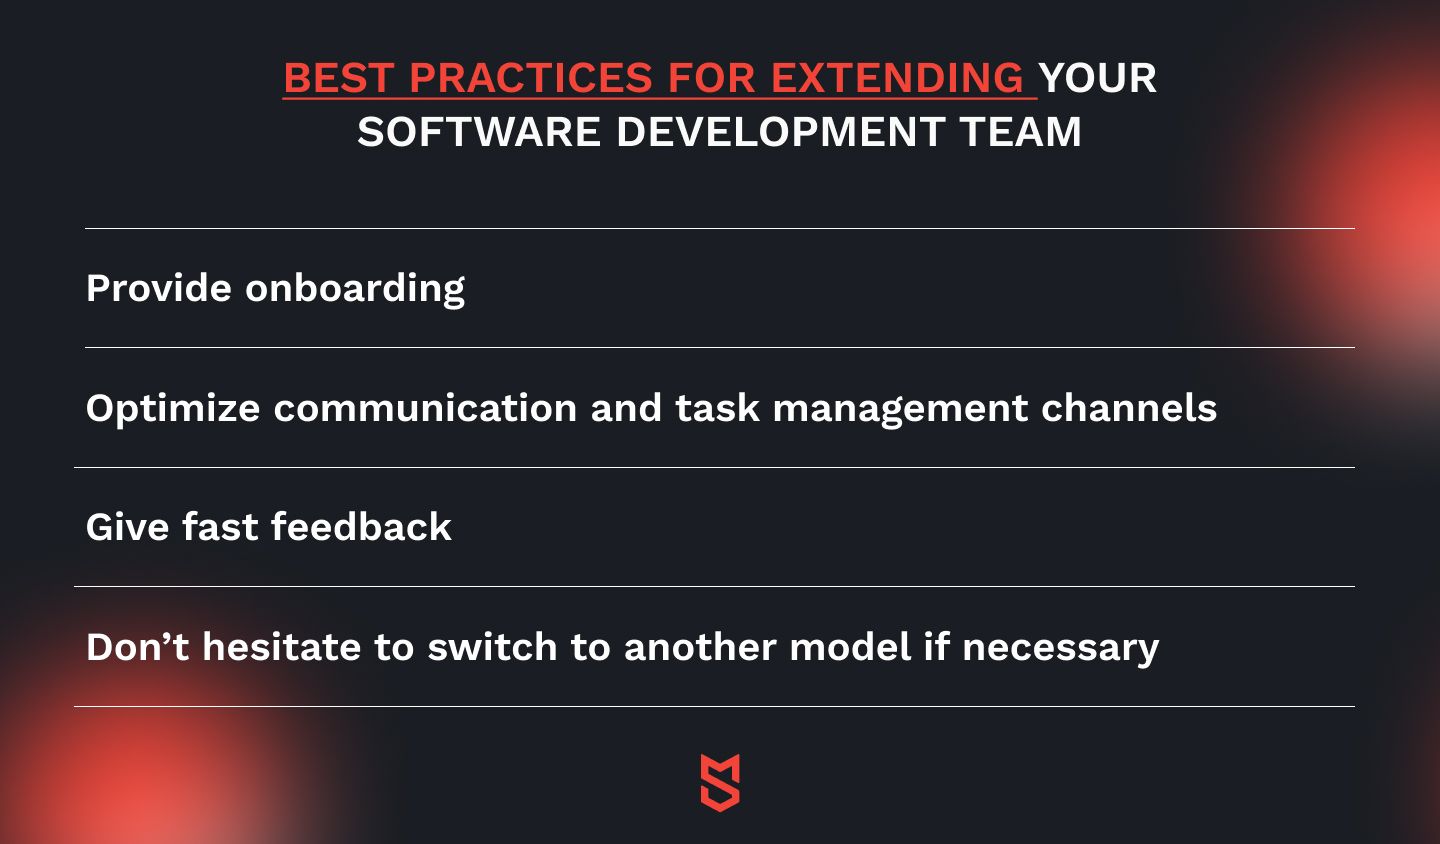 Best practices for extending your software development team from Mind Studios